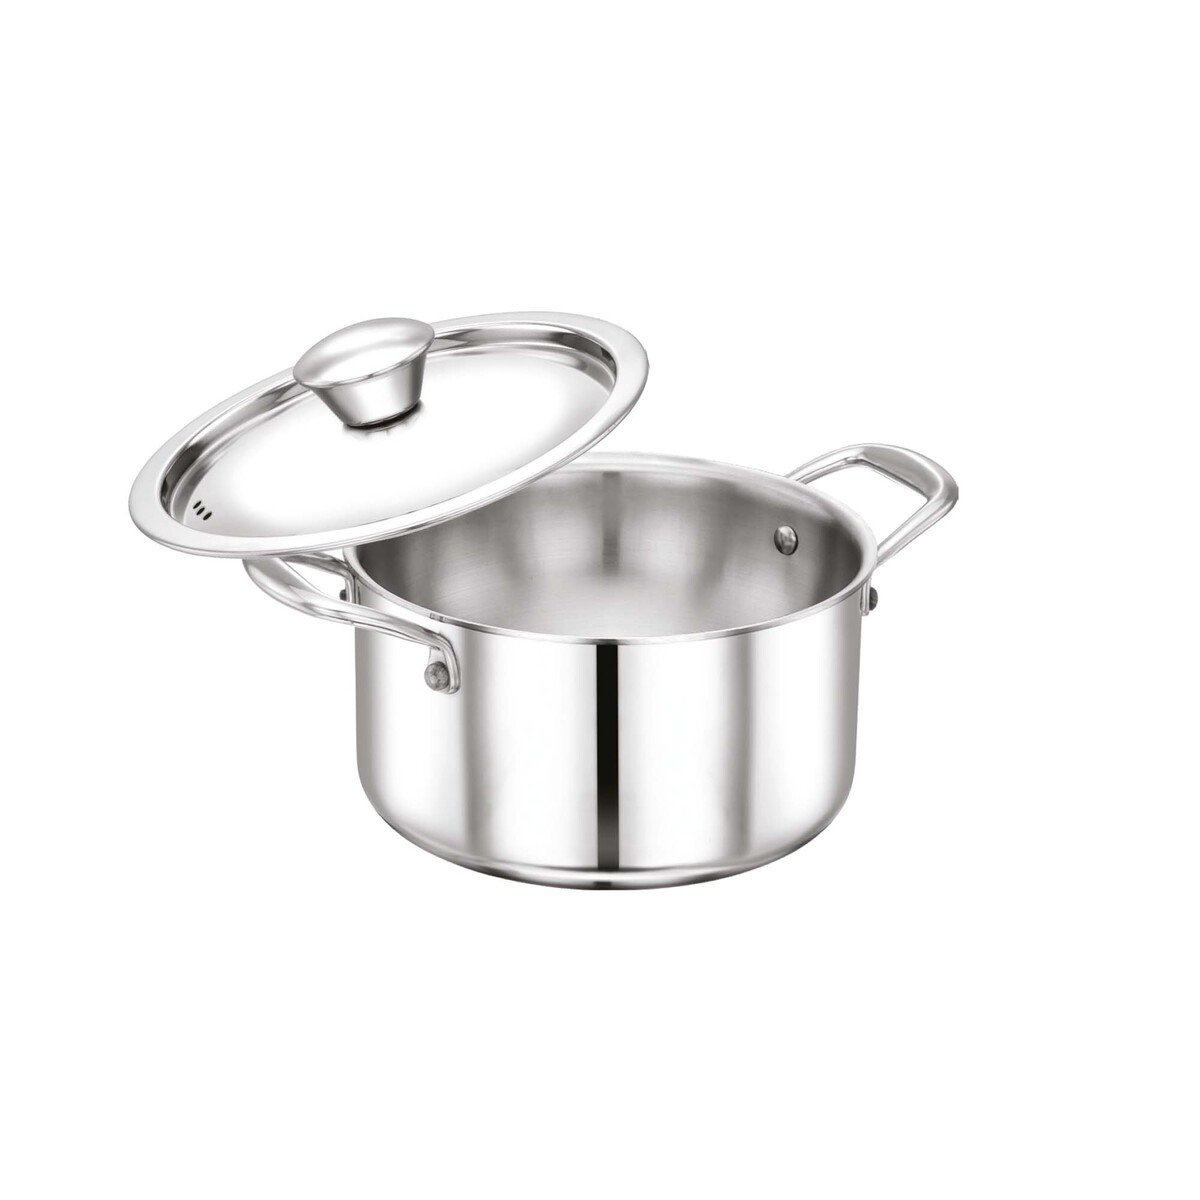 Chefline Stainless Steel Tri-Ply Dutch Oven INDRI 20cm